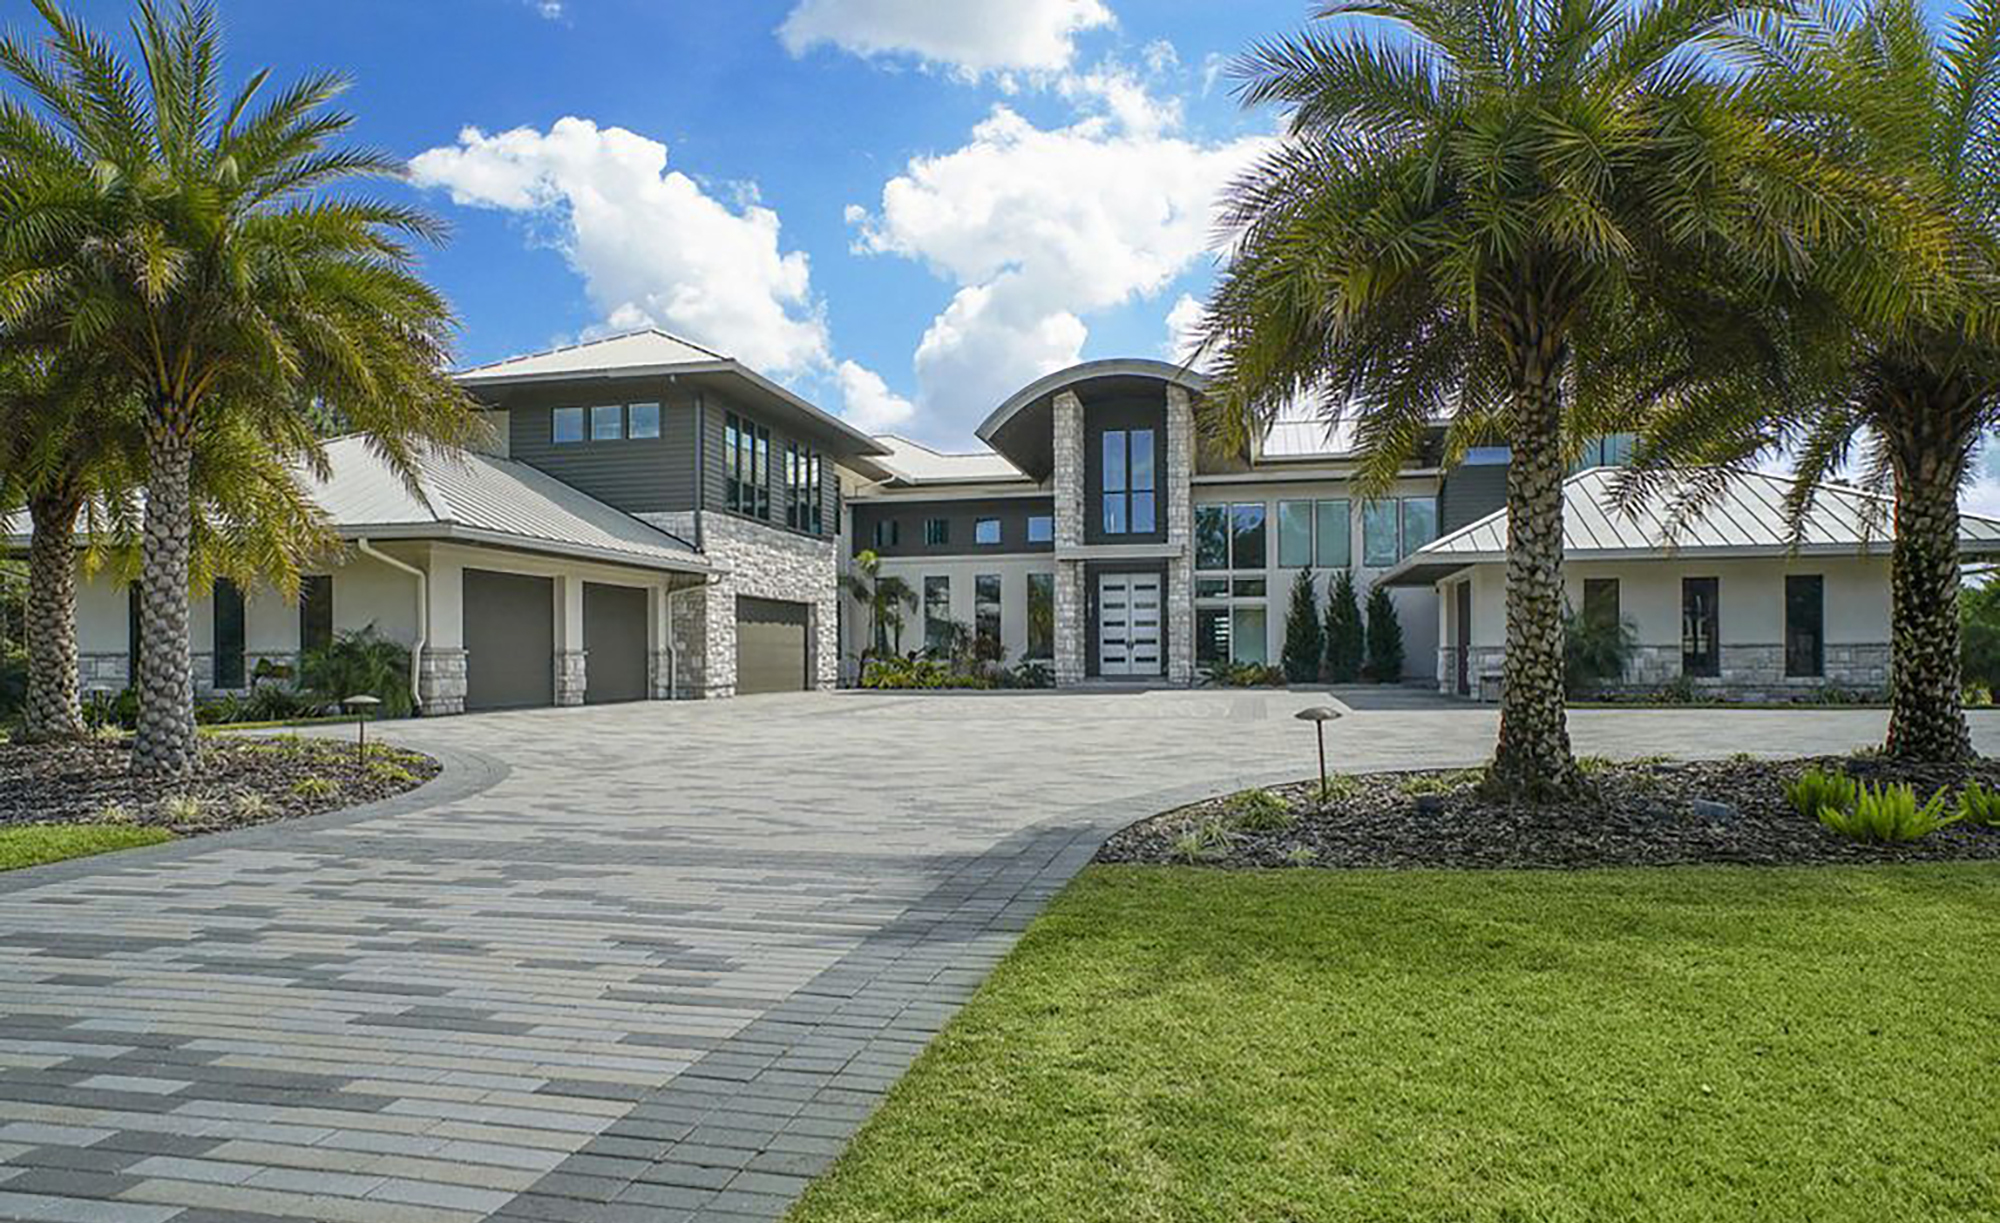 Tim Tebow bought his second house in Jacksonville by paying $2.99 million.